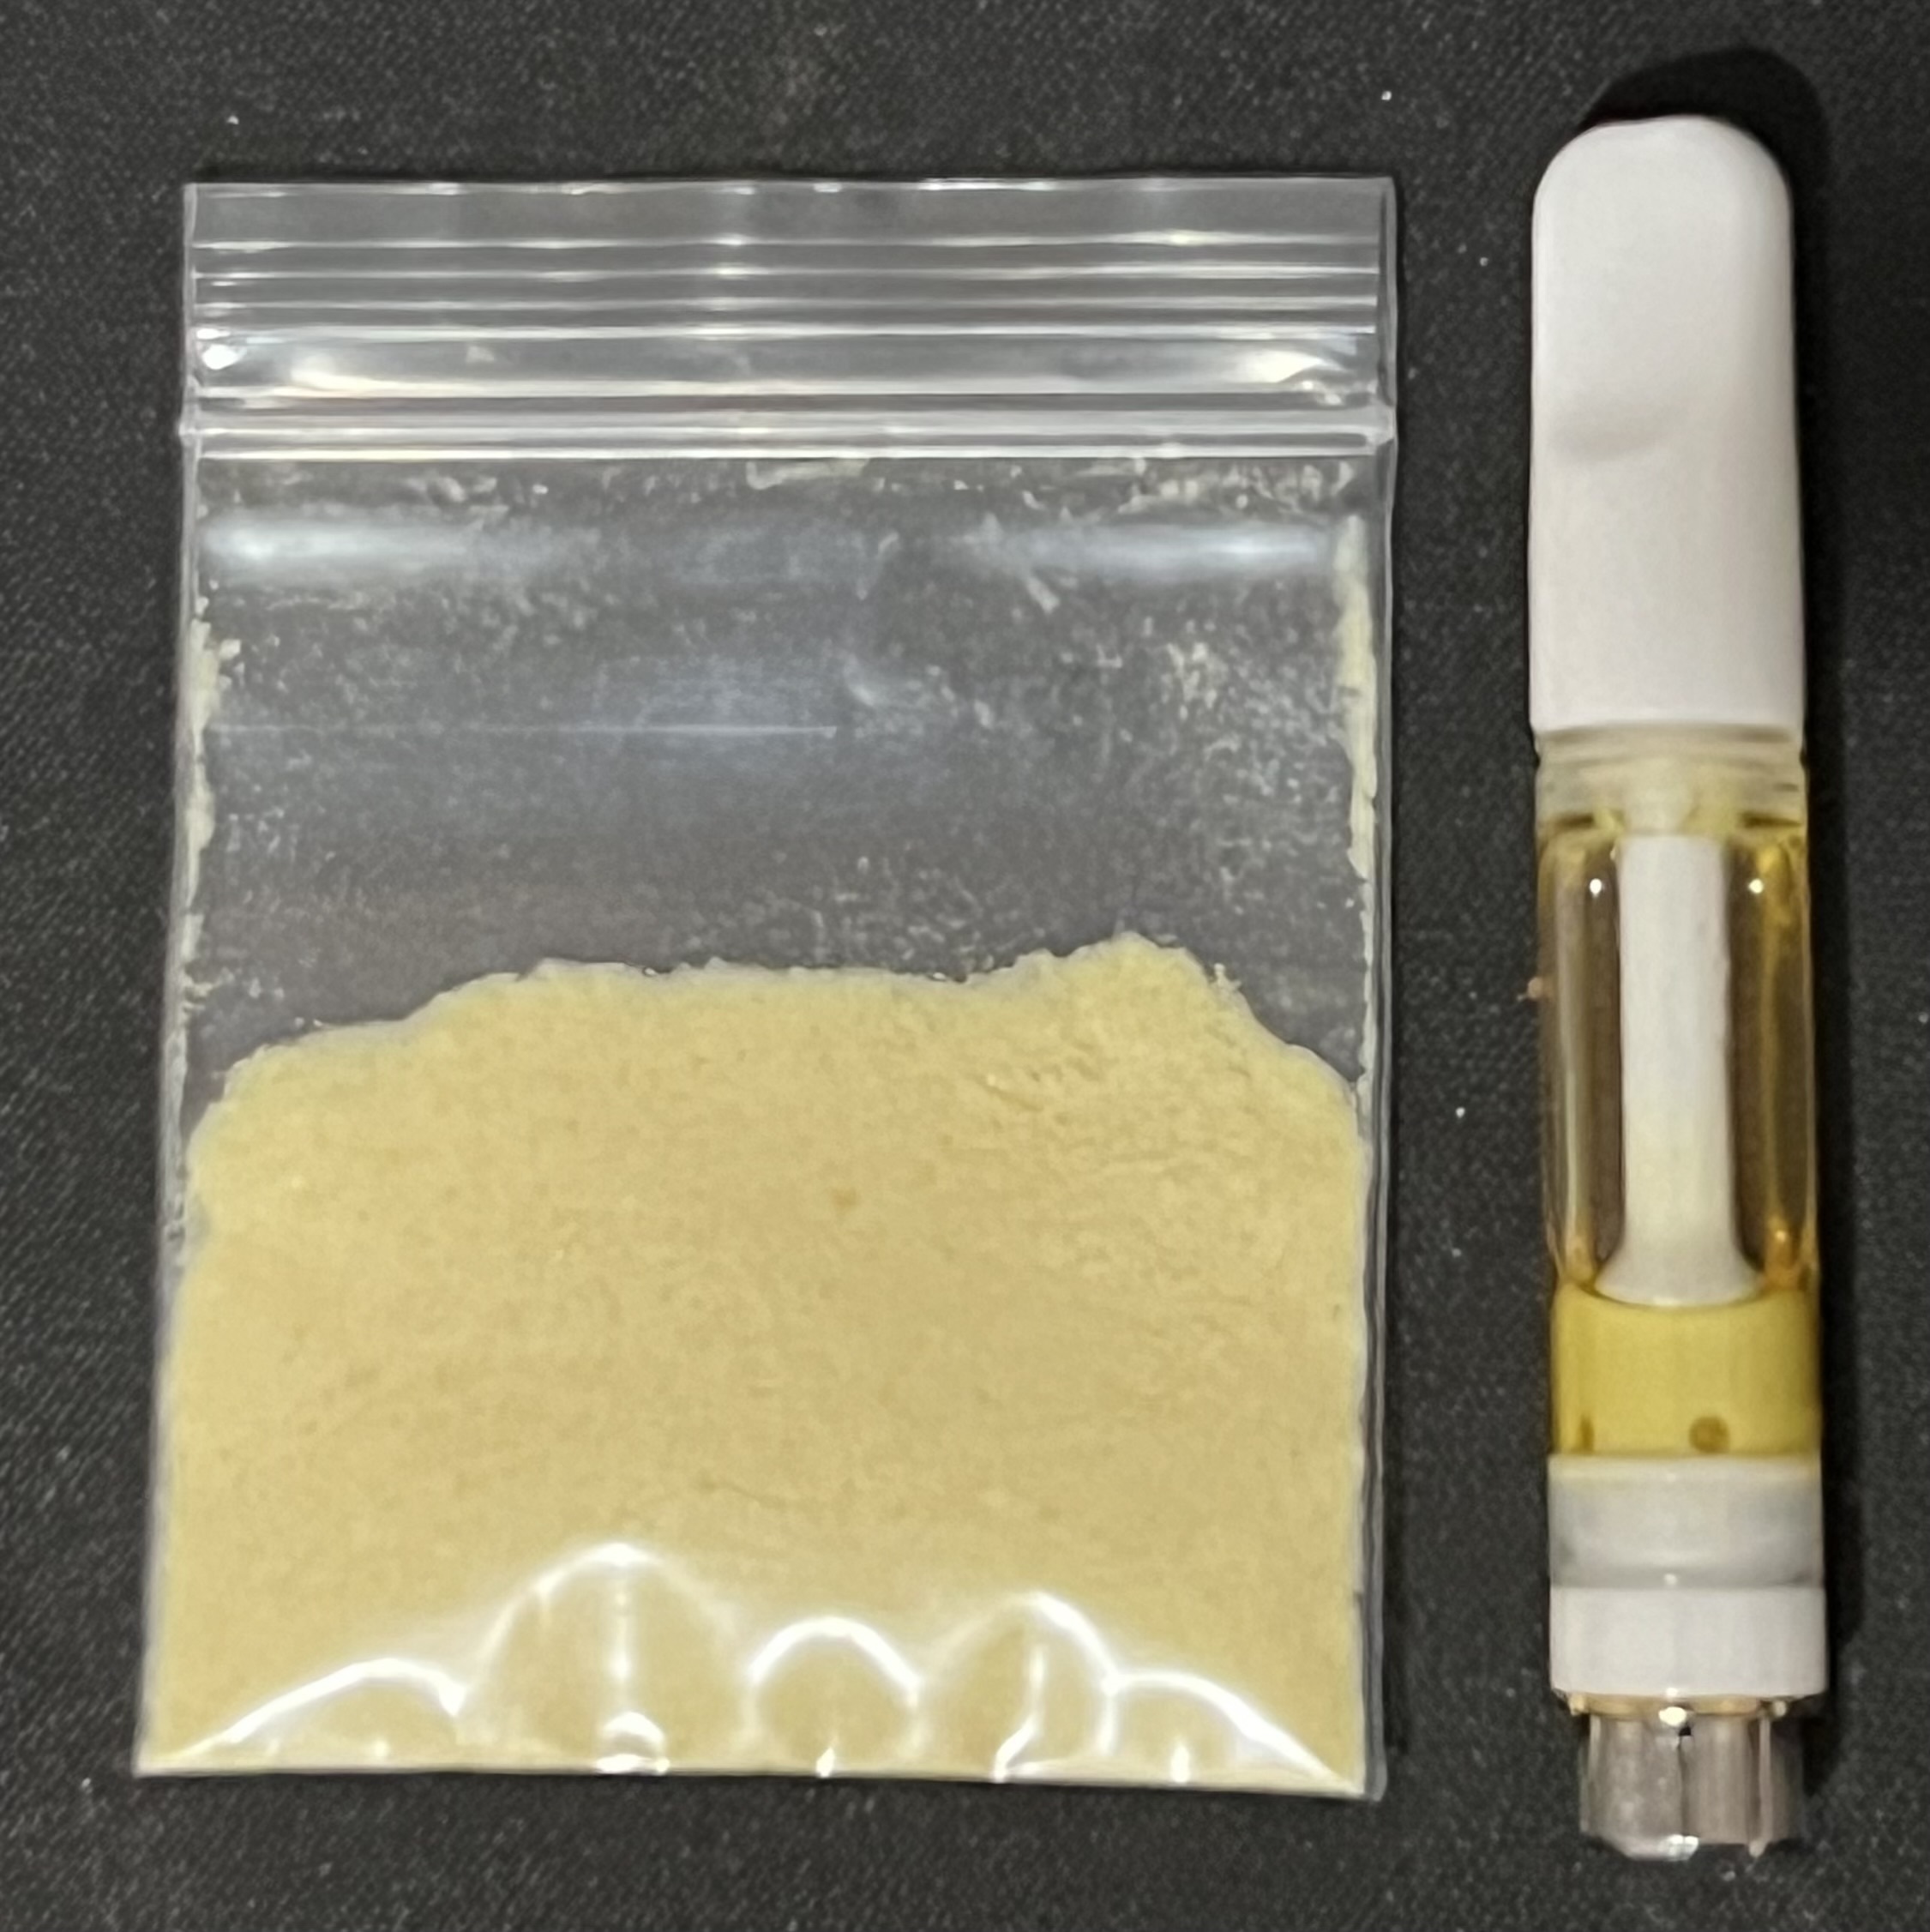 DMT Powder - Buy psychedelics And Mushrooms online